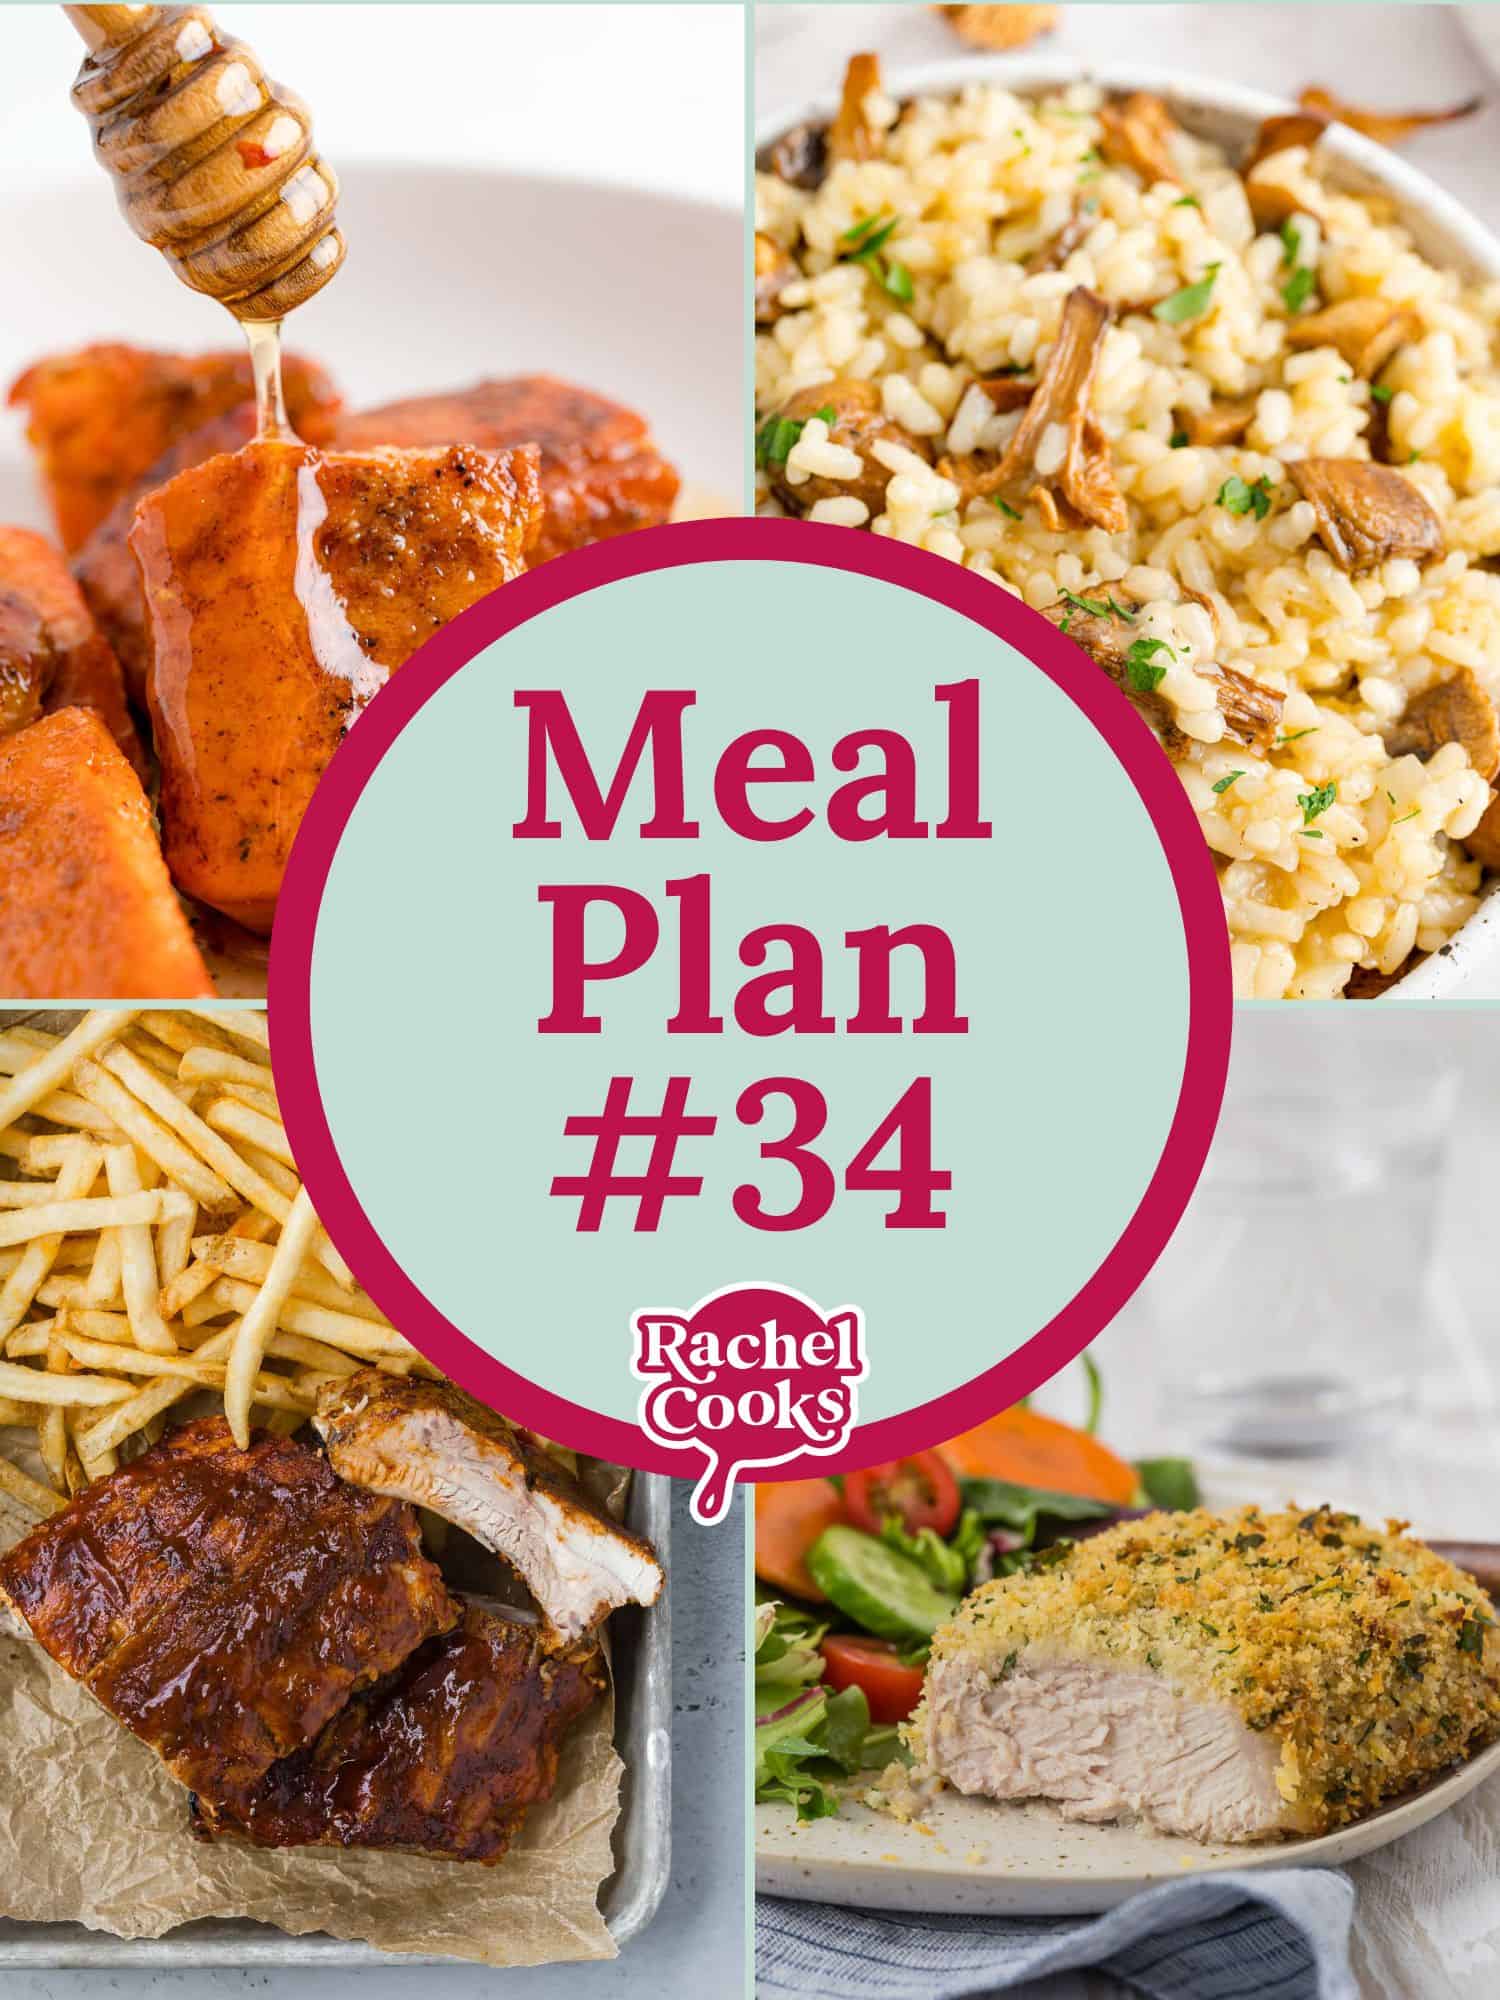 Meal plan graphic with text and recipe photos.